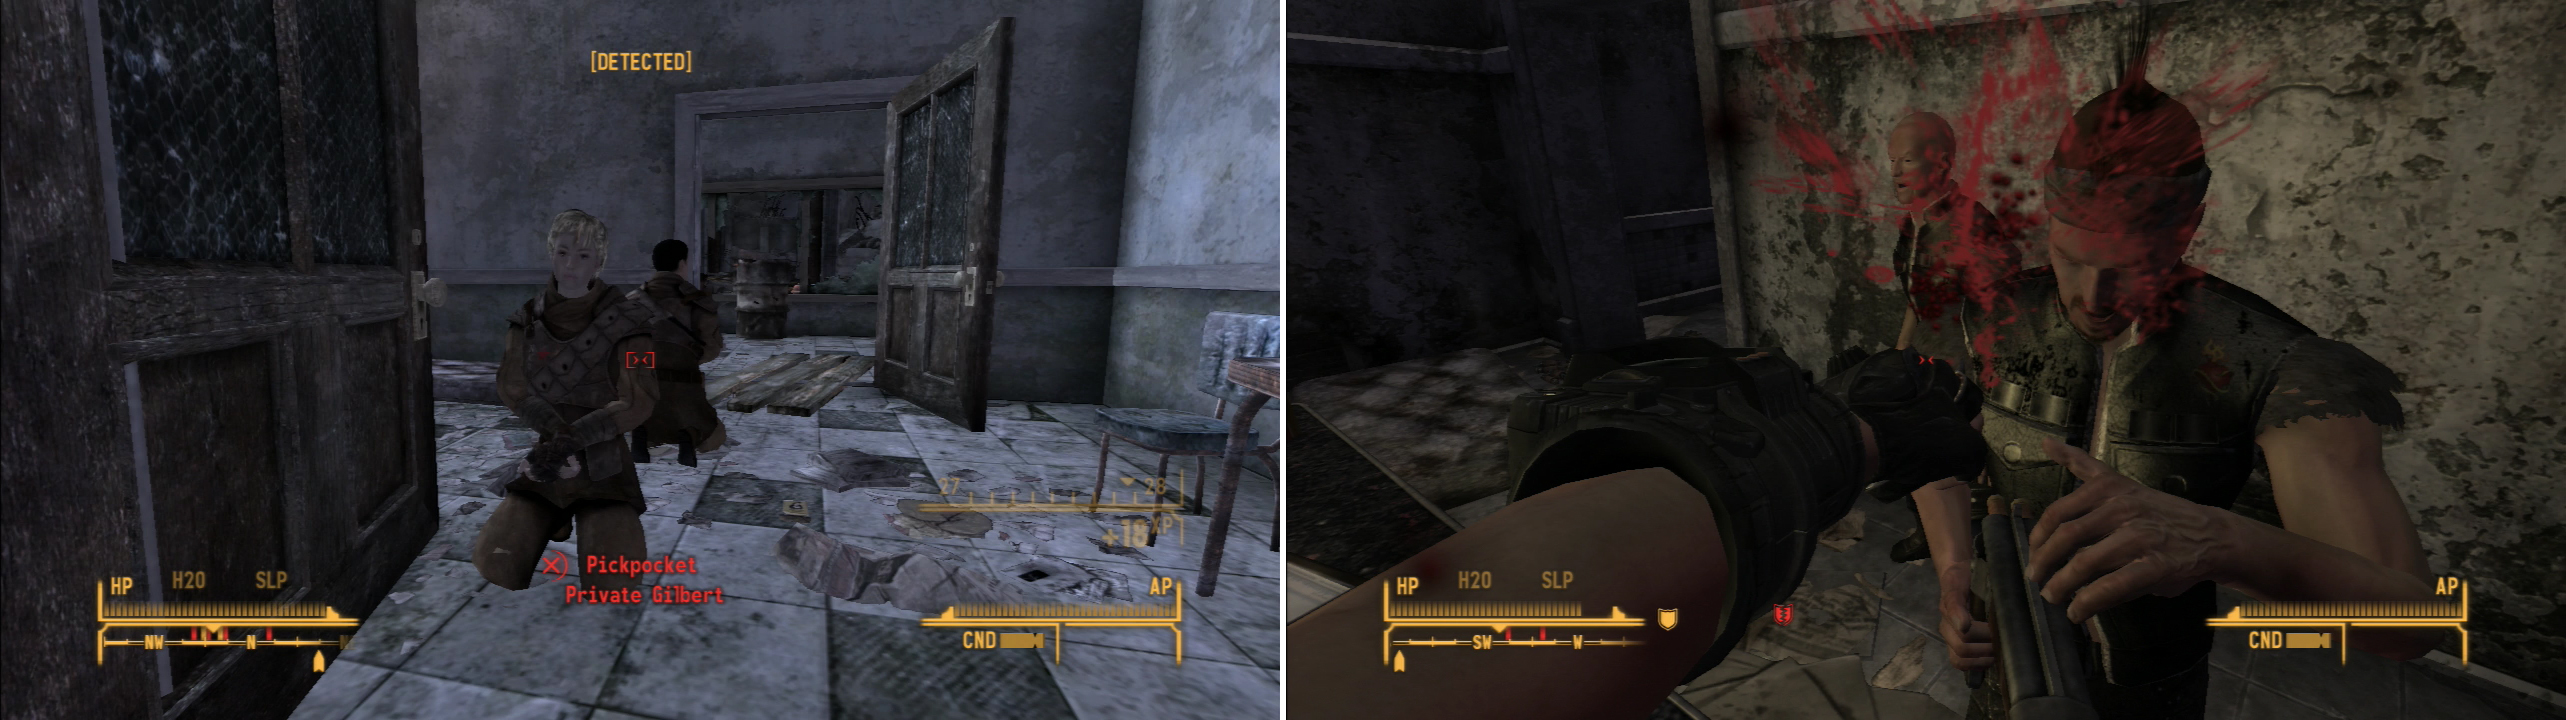 You can sneak into Boulder City and free the NCR hostages (left) or go in guns blazing (figuratively) and kill the Great Khans (right).